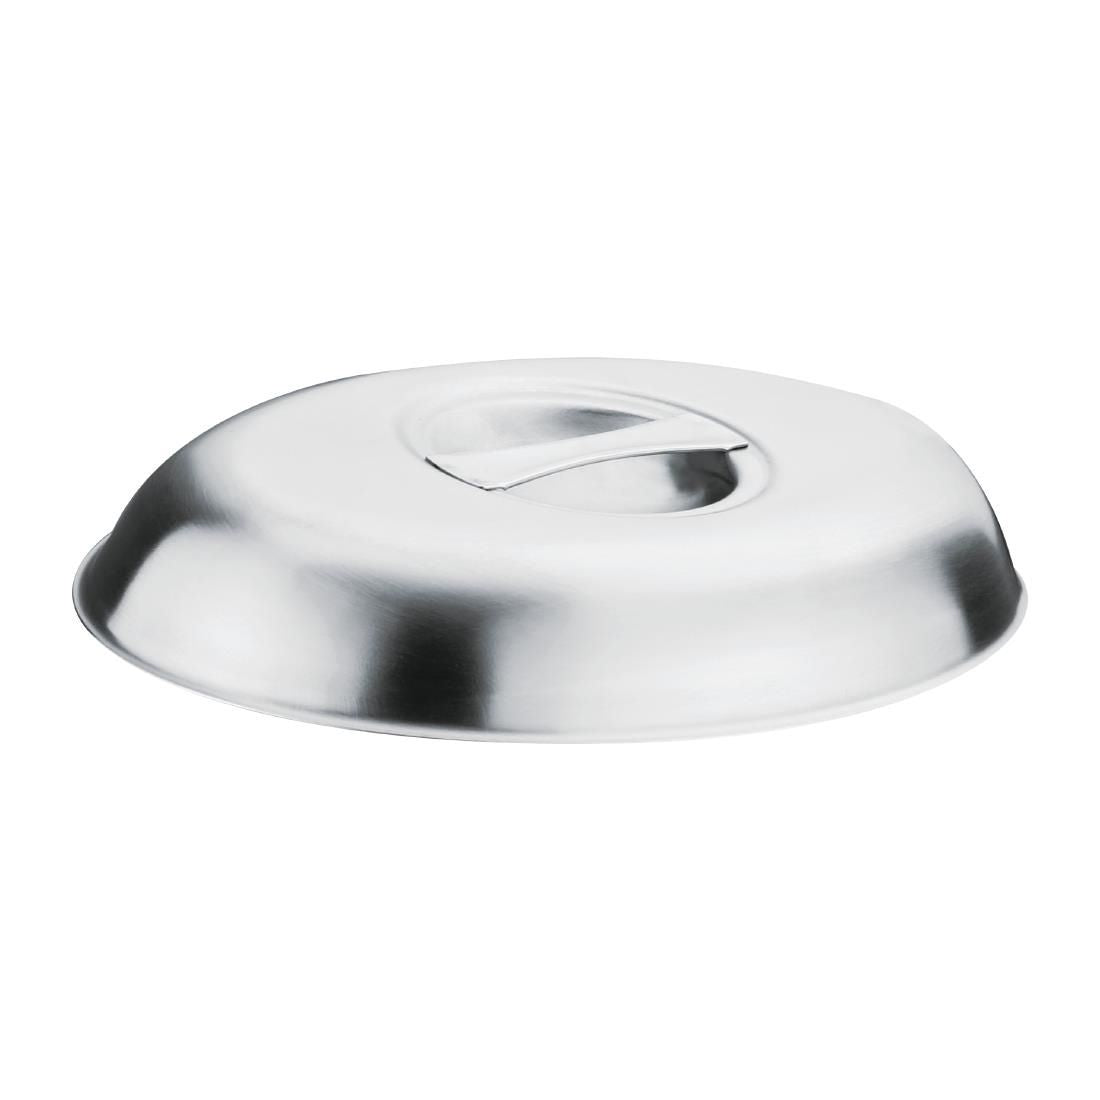 P183 Olympia Oval Vegetable Dish Lid 290 x 200mm